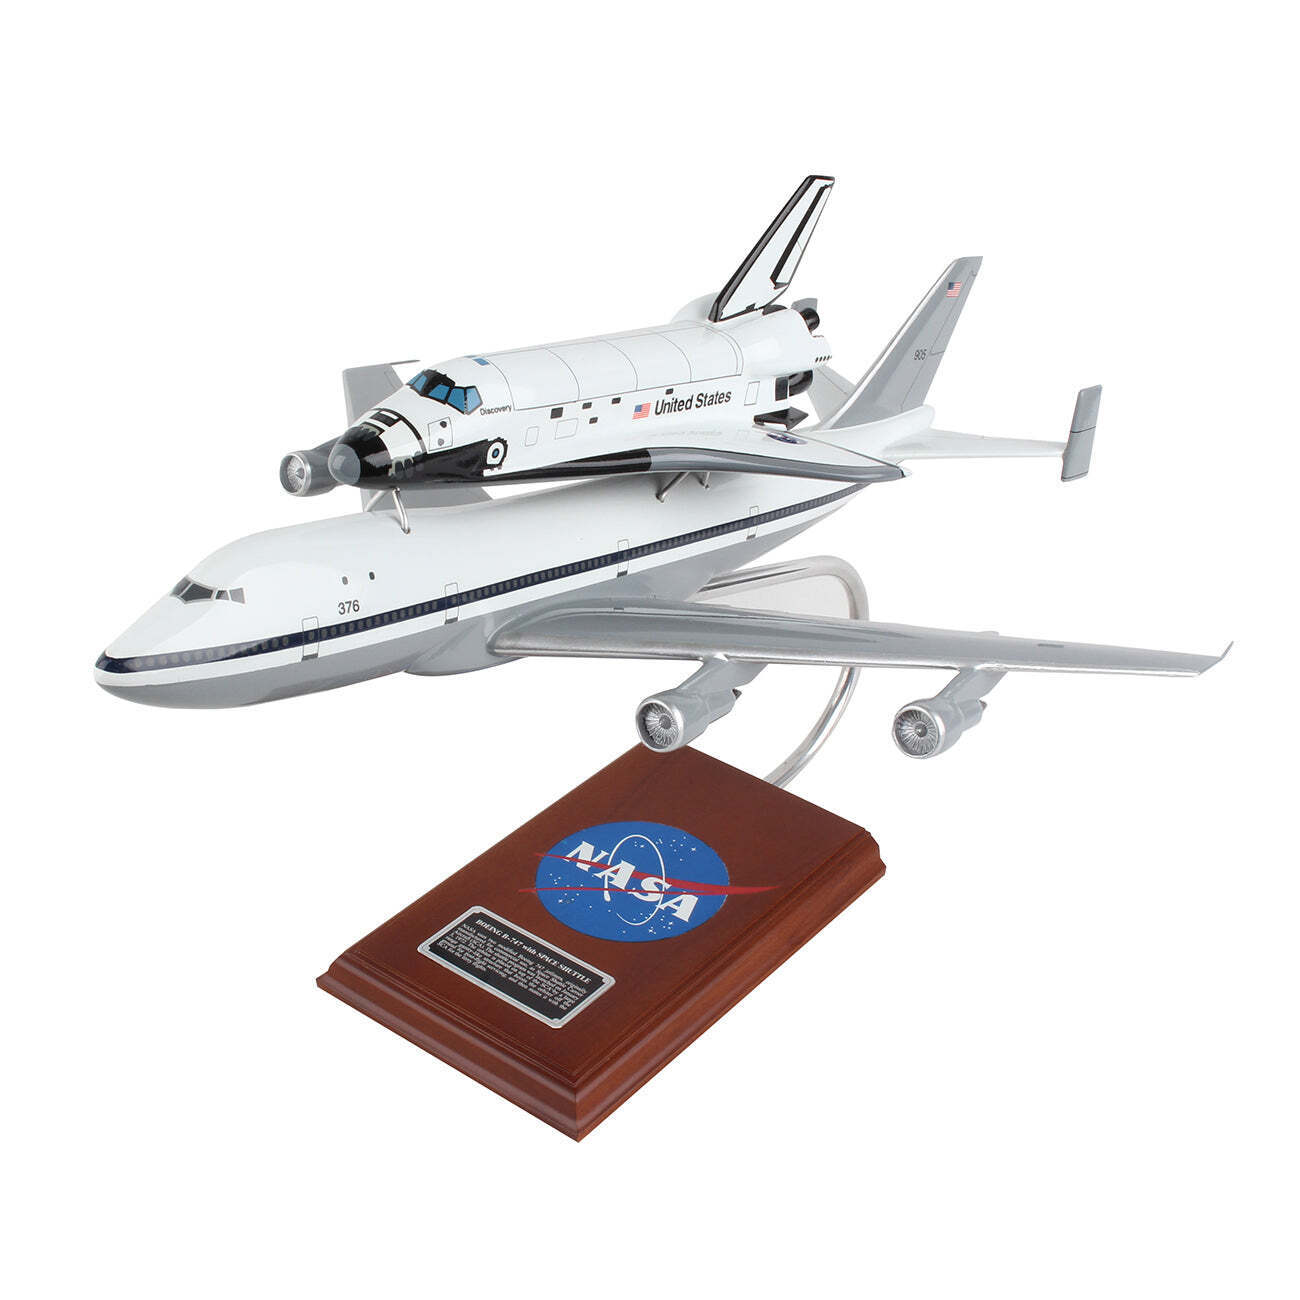 NASA Boeing 747 + Space Shuttle Discovery Desk Display Model 1/144 SC Airplane